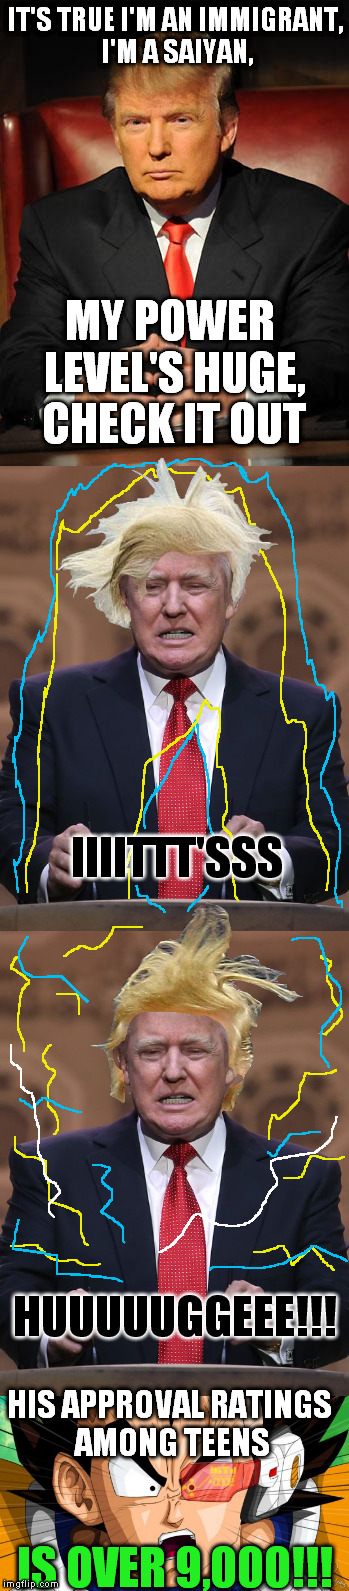 Trump N Ball Z | IT'S TRUE I'M AN IMMIGRANT, I'M A SAIYAN, MY POWER LEVEL'S HUGE, CHECK IT OUT; IIIITTT'SSS; HUUUUUGGEEE!!! HIS APPROVAL RATINGS AMONG TEENS; IS OVER 9,000!!! | image tagged in memes,donald trump,dragon ball z,vegeta over 9000 | made w/ Imgflip meme maker